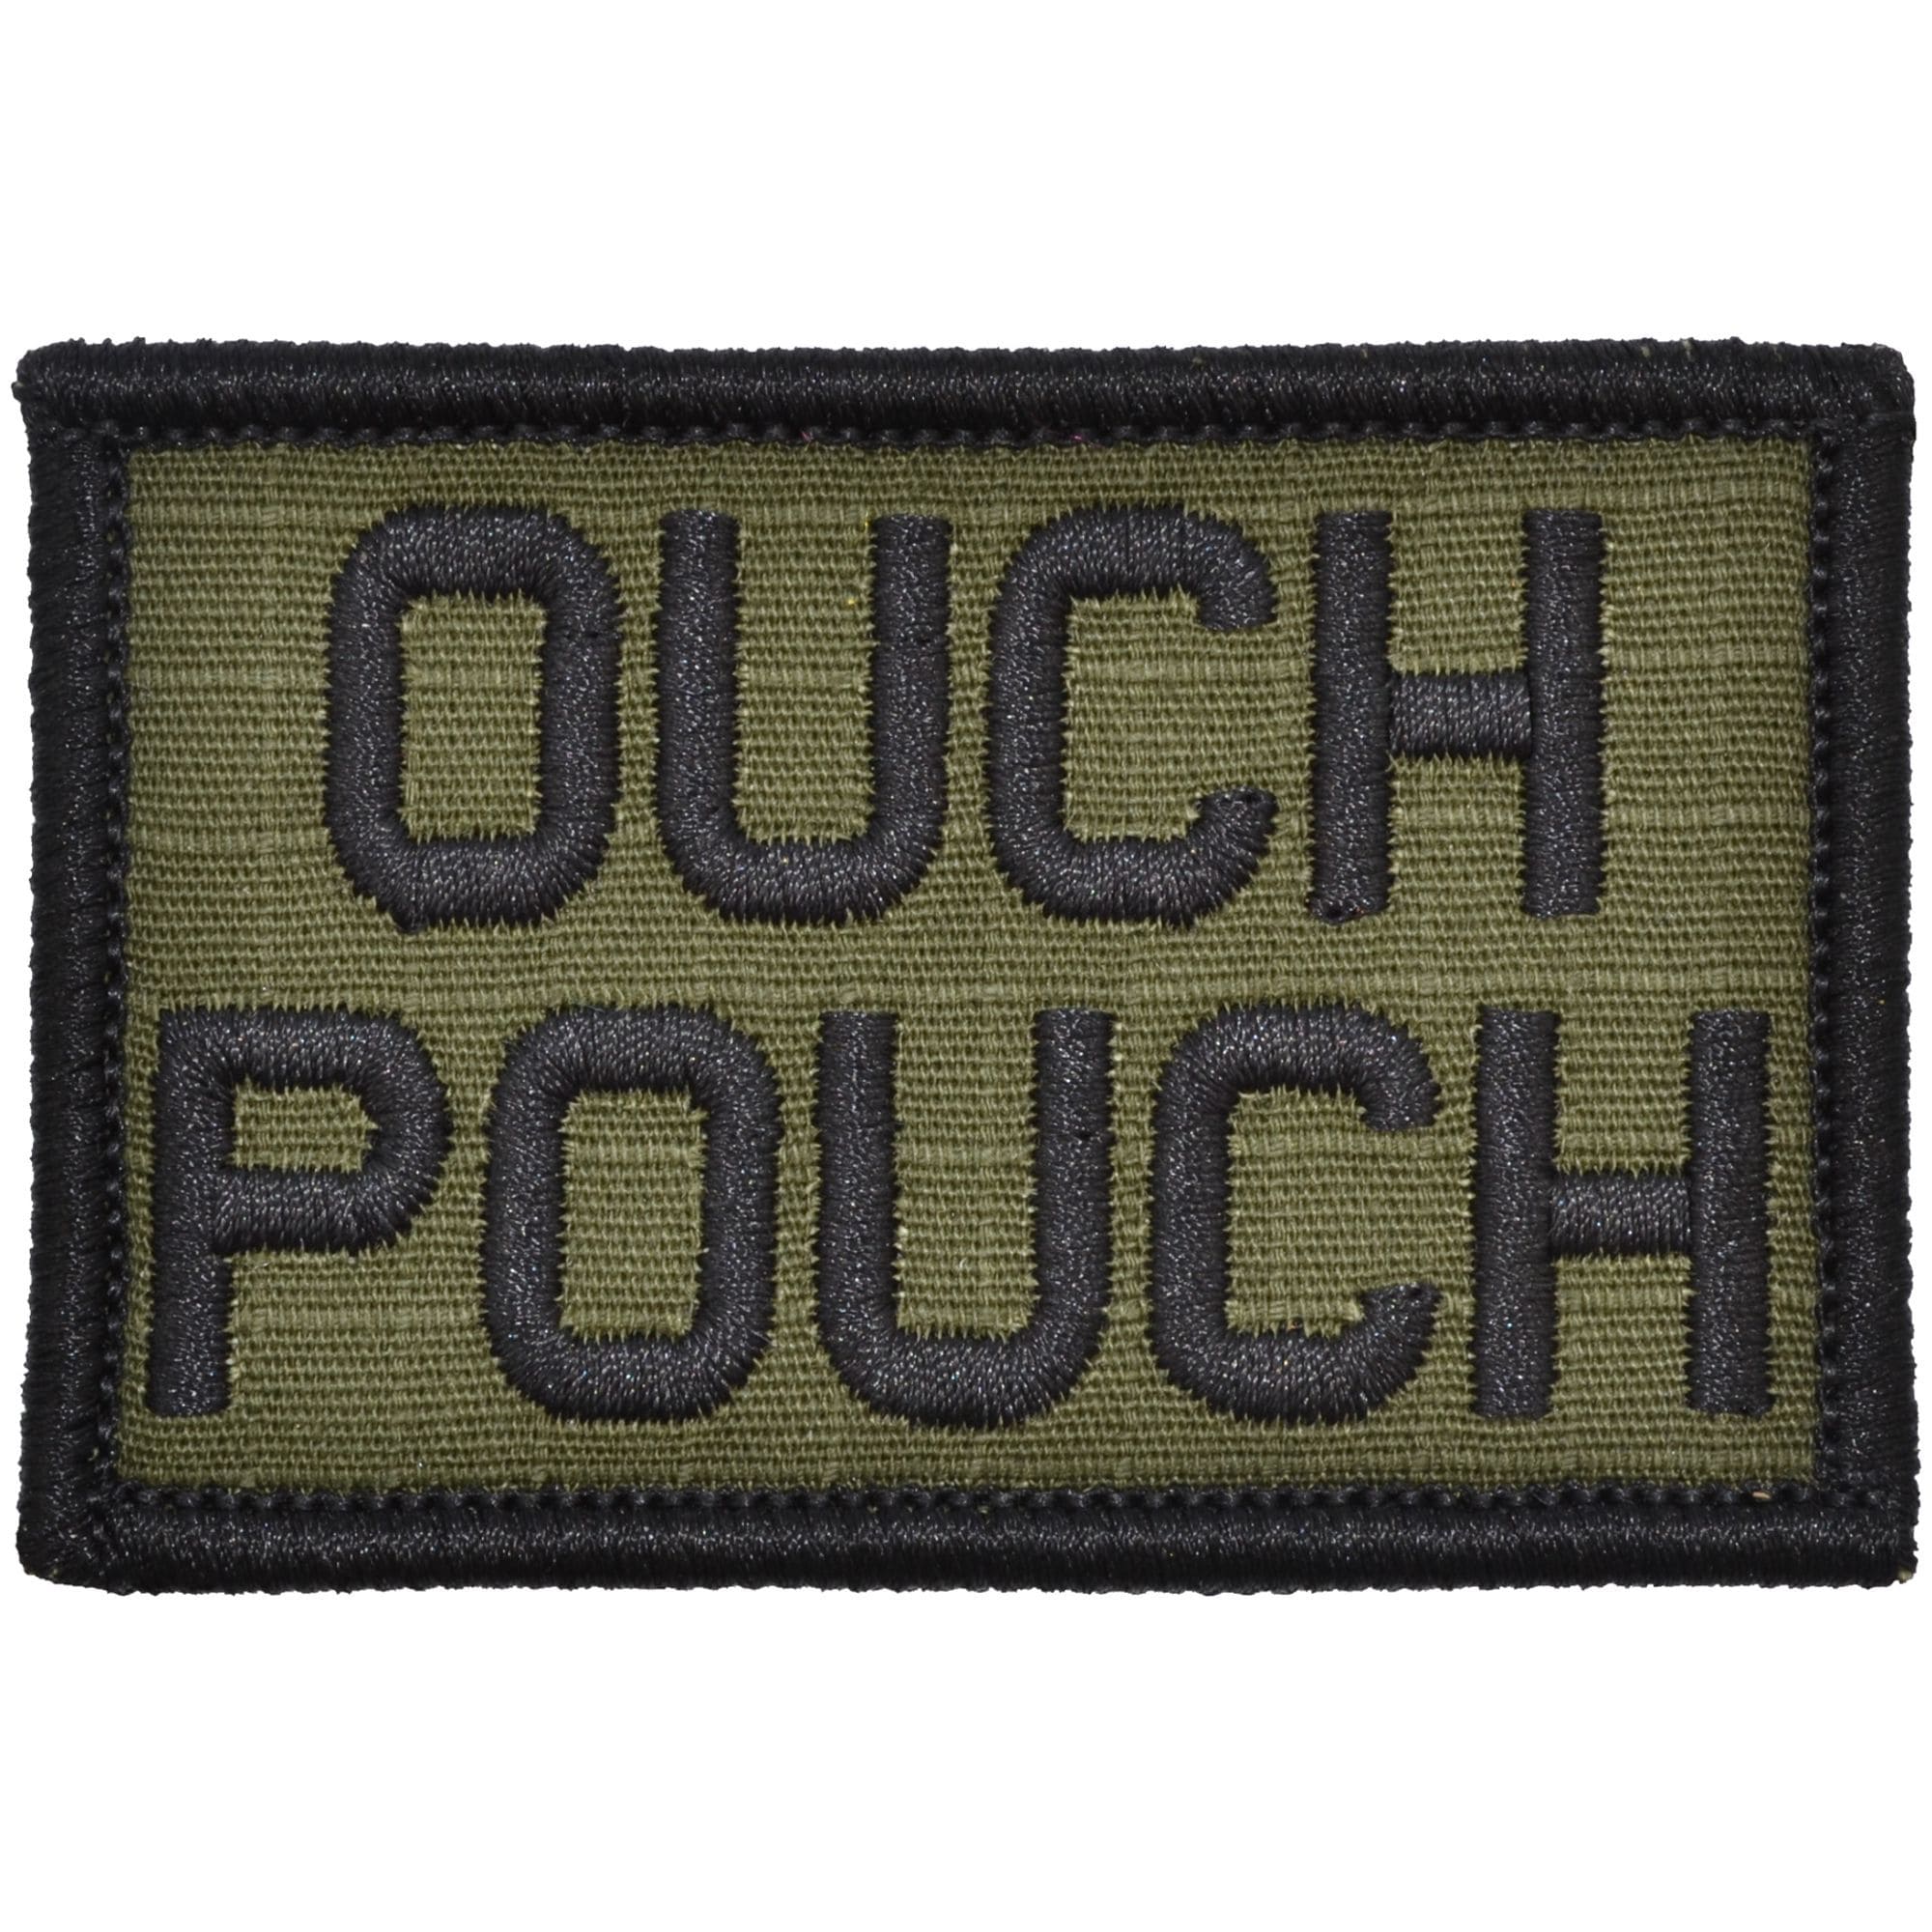 Tactical Gear Junkie Patches Olive Drab Ouch Pouch - 2x3 Patch